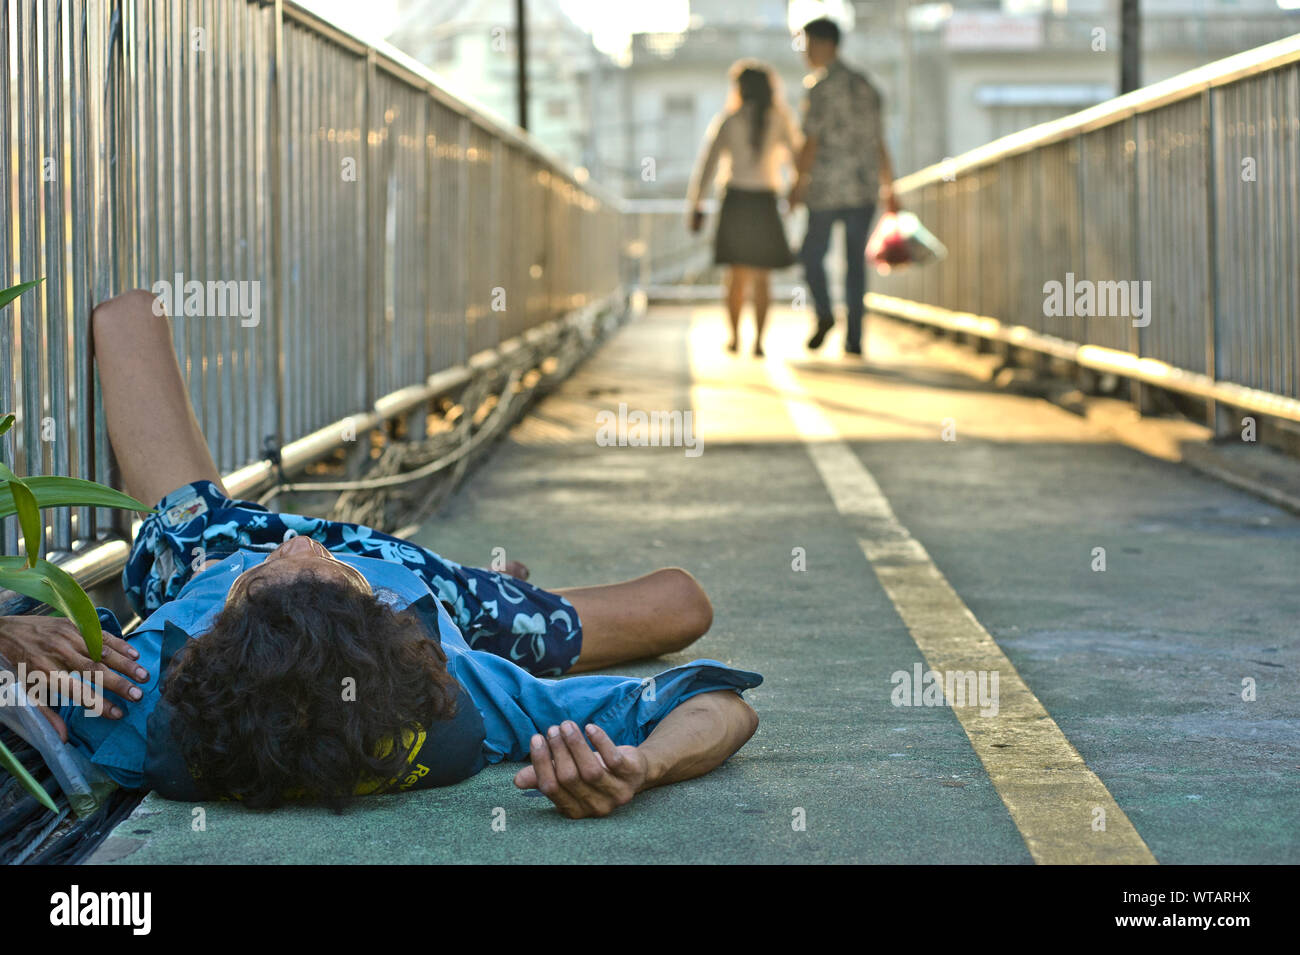 Homeless sleeping on catwalk and couple walking with hands joined Stock Photo